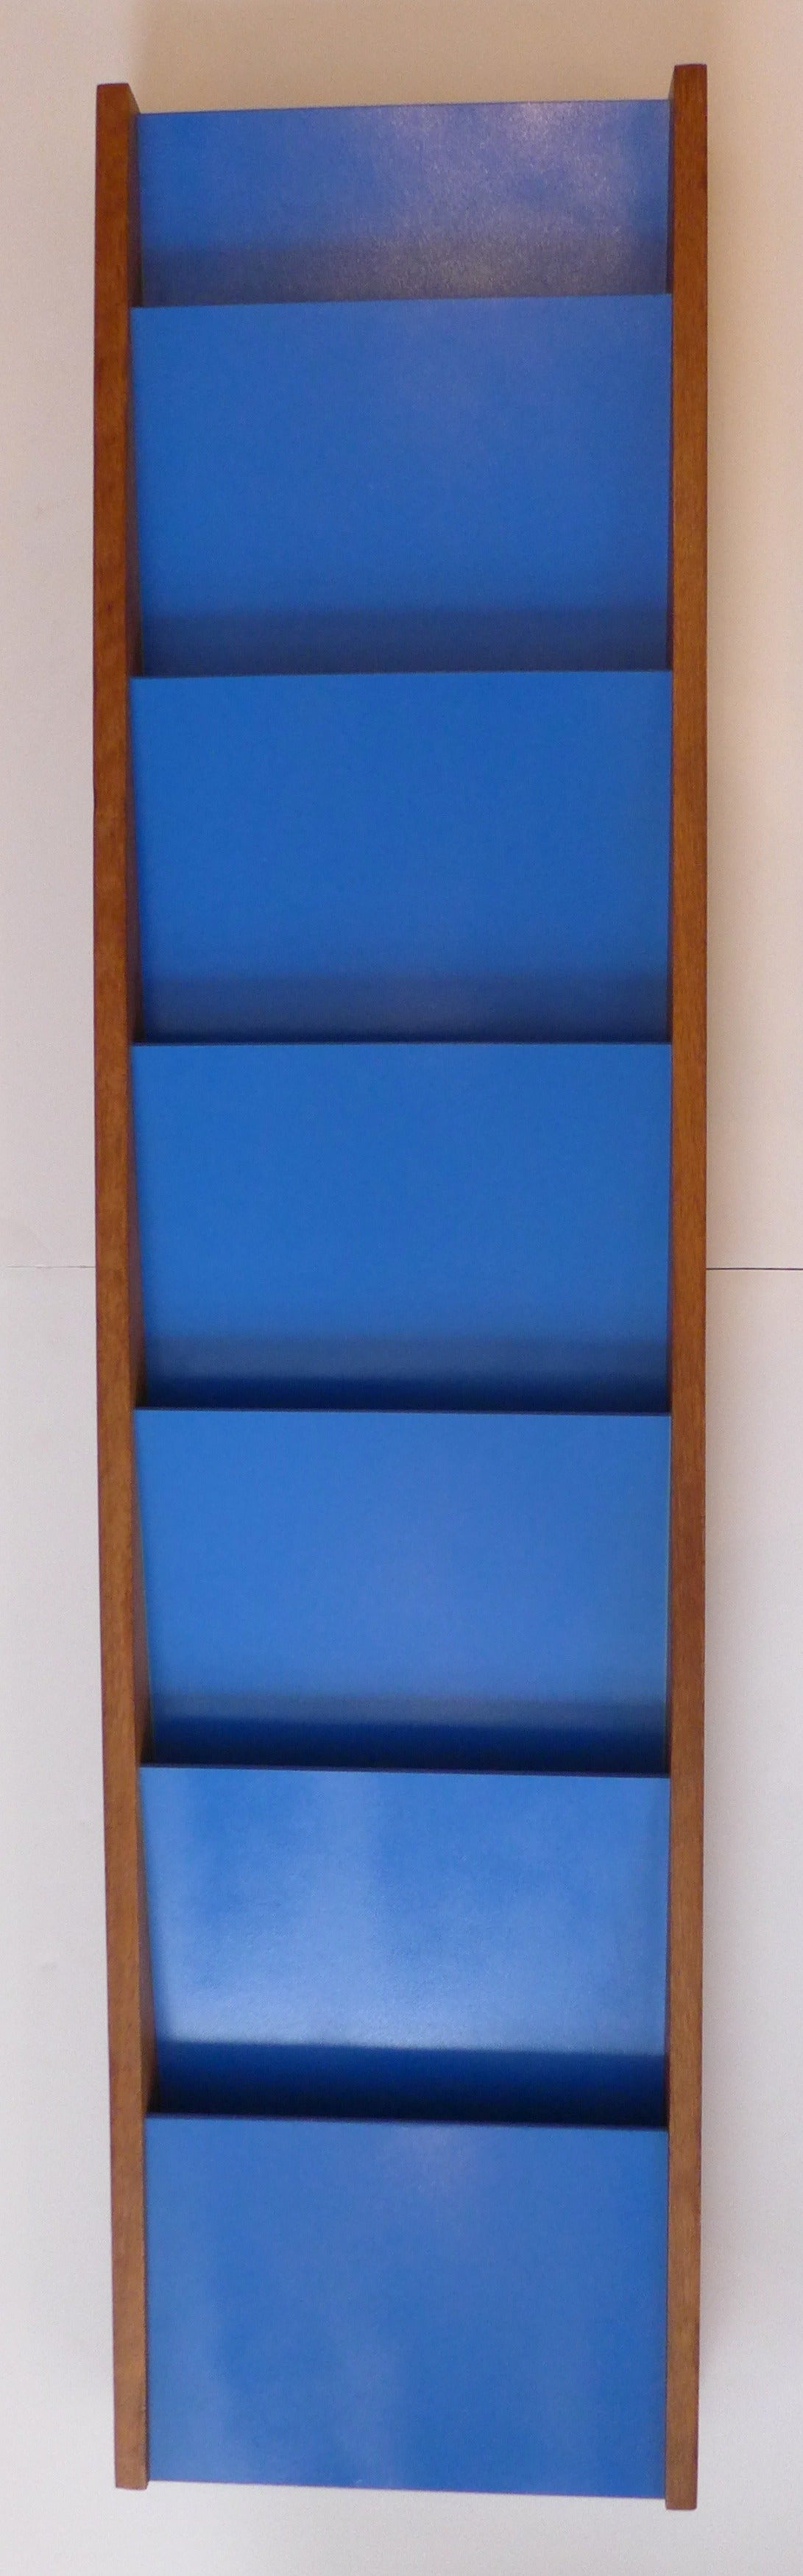 Wall-hanging magazine rack of lacquered masonite and walnut, made by Peter Pepper Products of California, c. 1960's.  A colorful way to organize papers or publications.  The walnut sides are in good original condition; the masonite panels have been